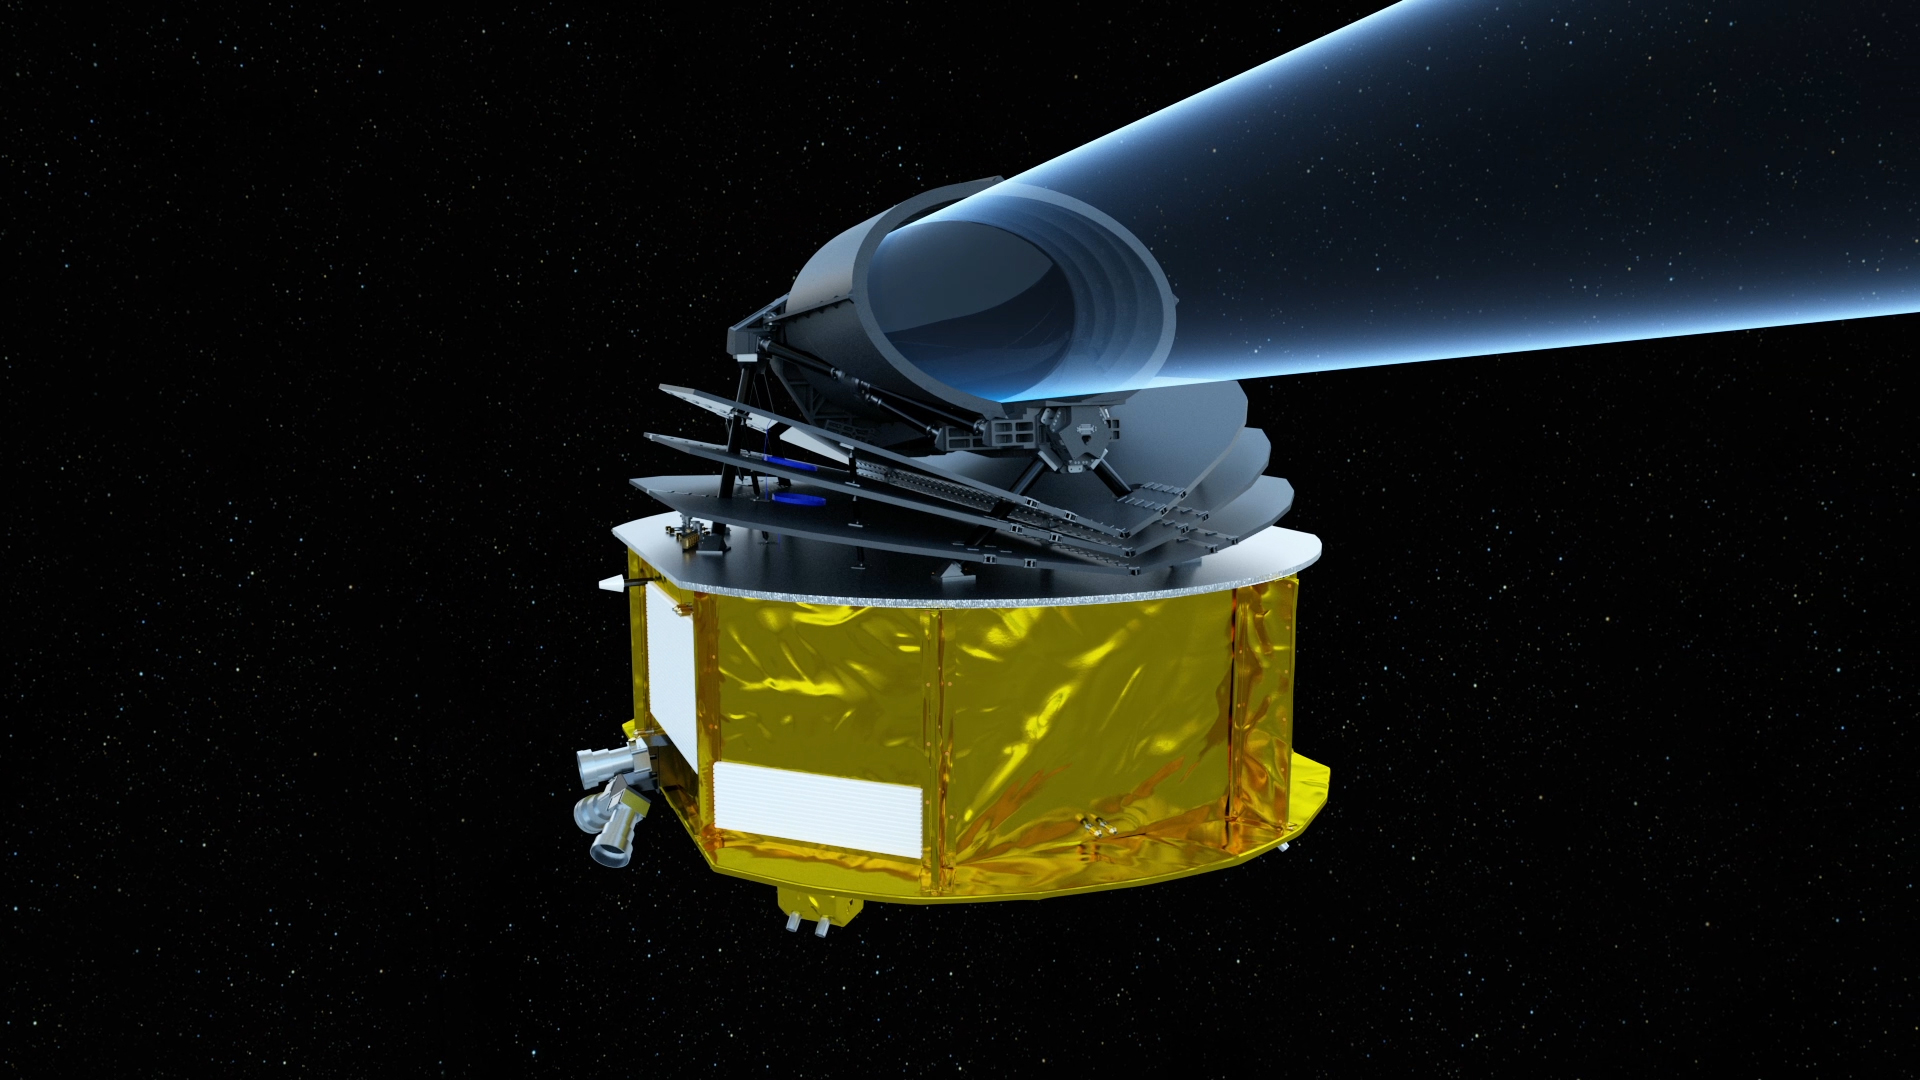 The European Space Agency formally adopts Ariel, the exoplanet explorer ...